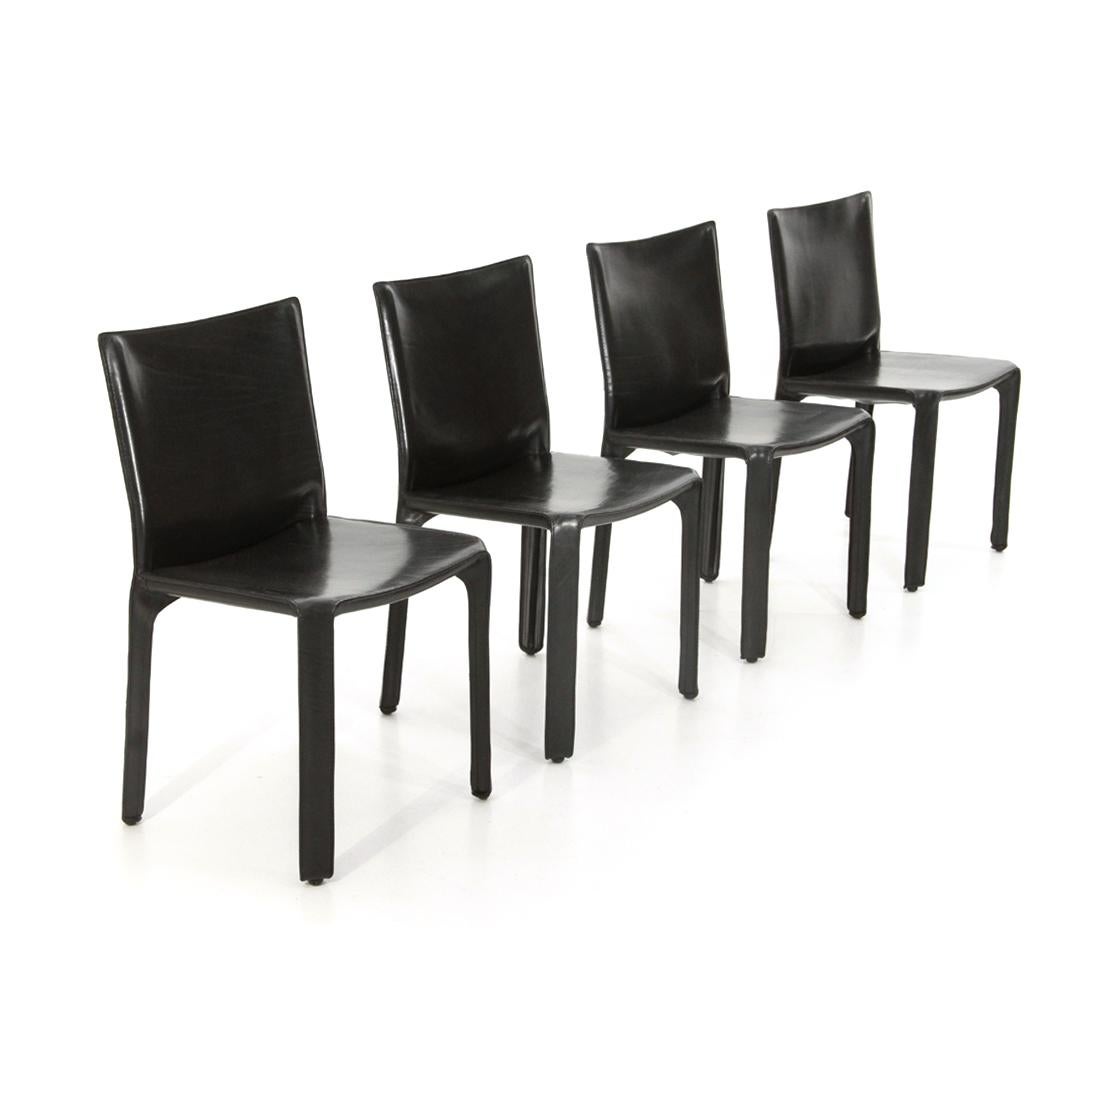 4 chairs produced in the 1970s by Cassina based on a design by Mario Bellini.
Steel skeleton.
Cover in black leather closed by zippers.
Good general condition, some signs due to normal use over time.

Dimensions: Length 48 cm, depth 50 cm,